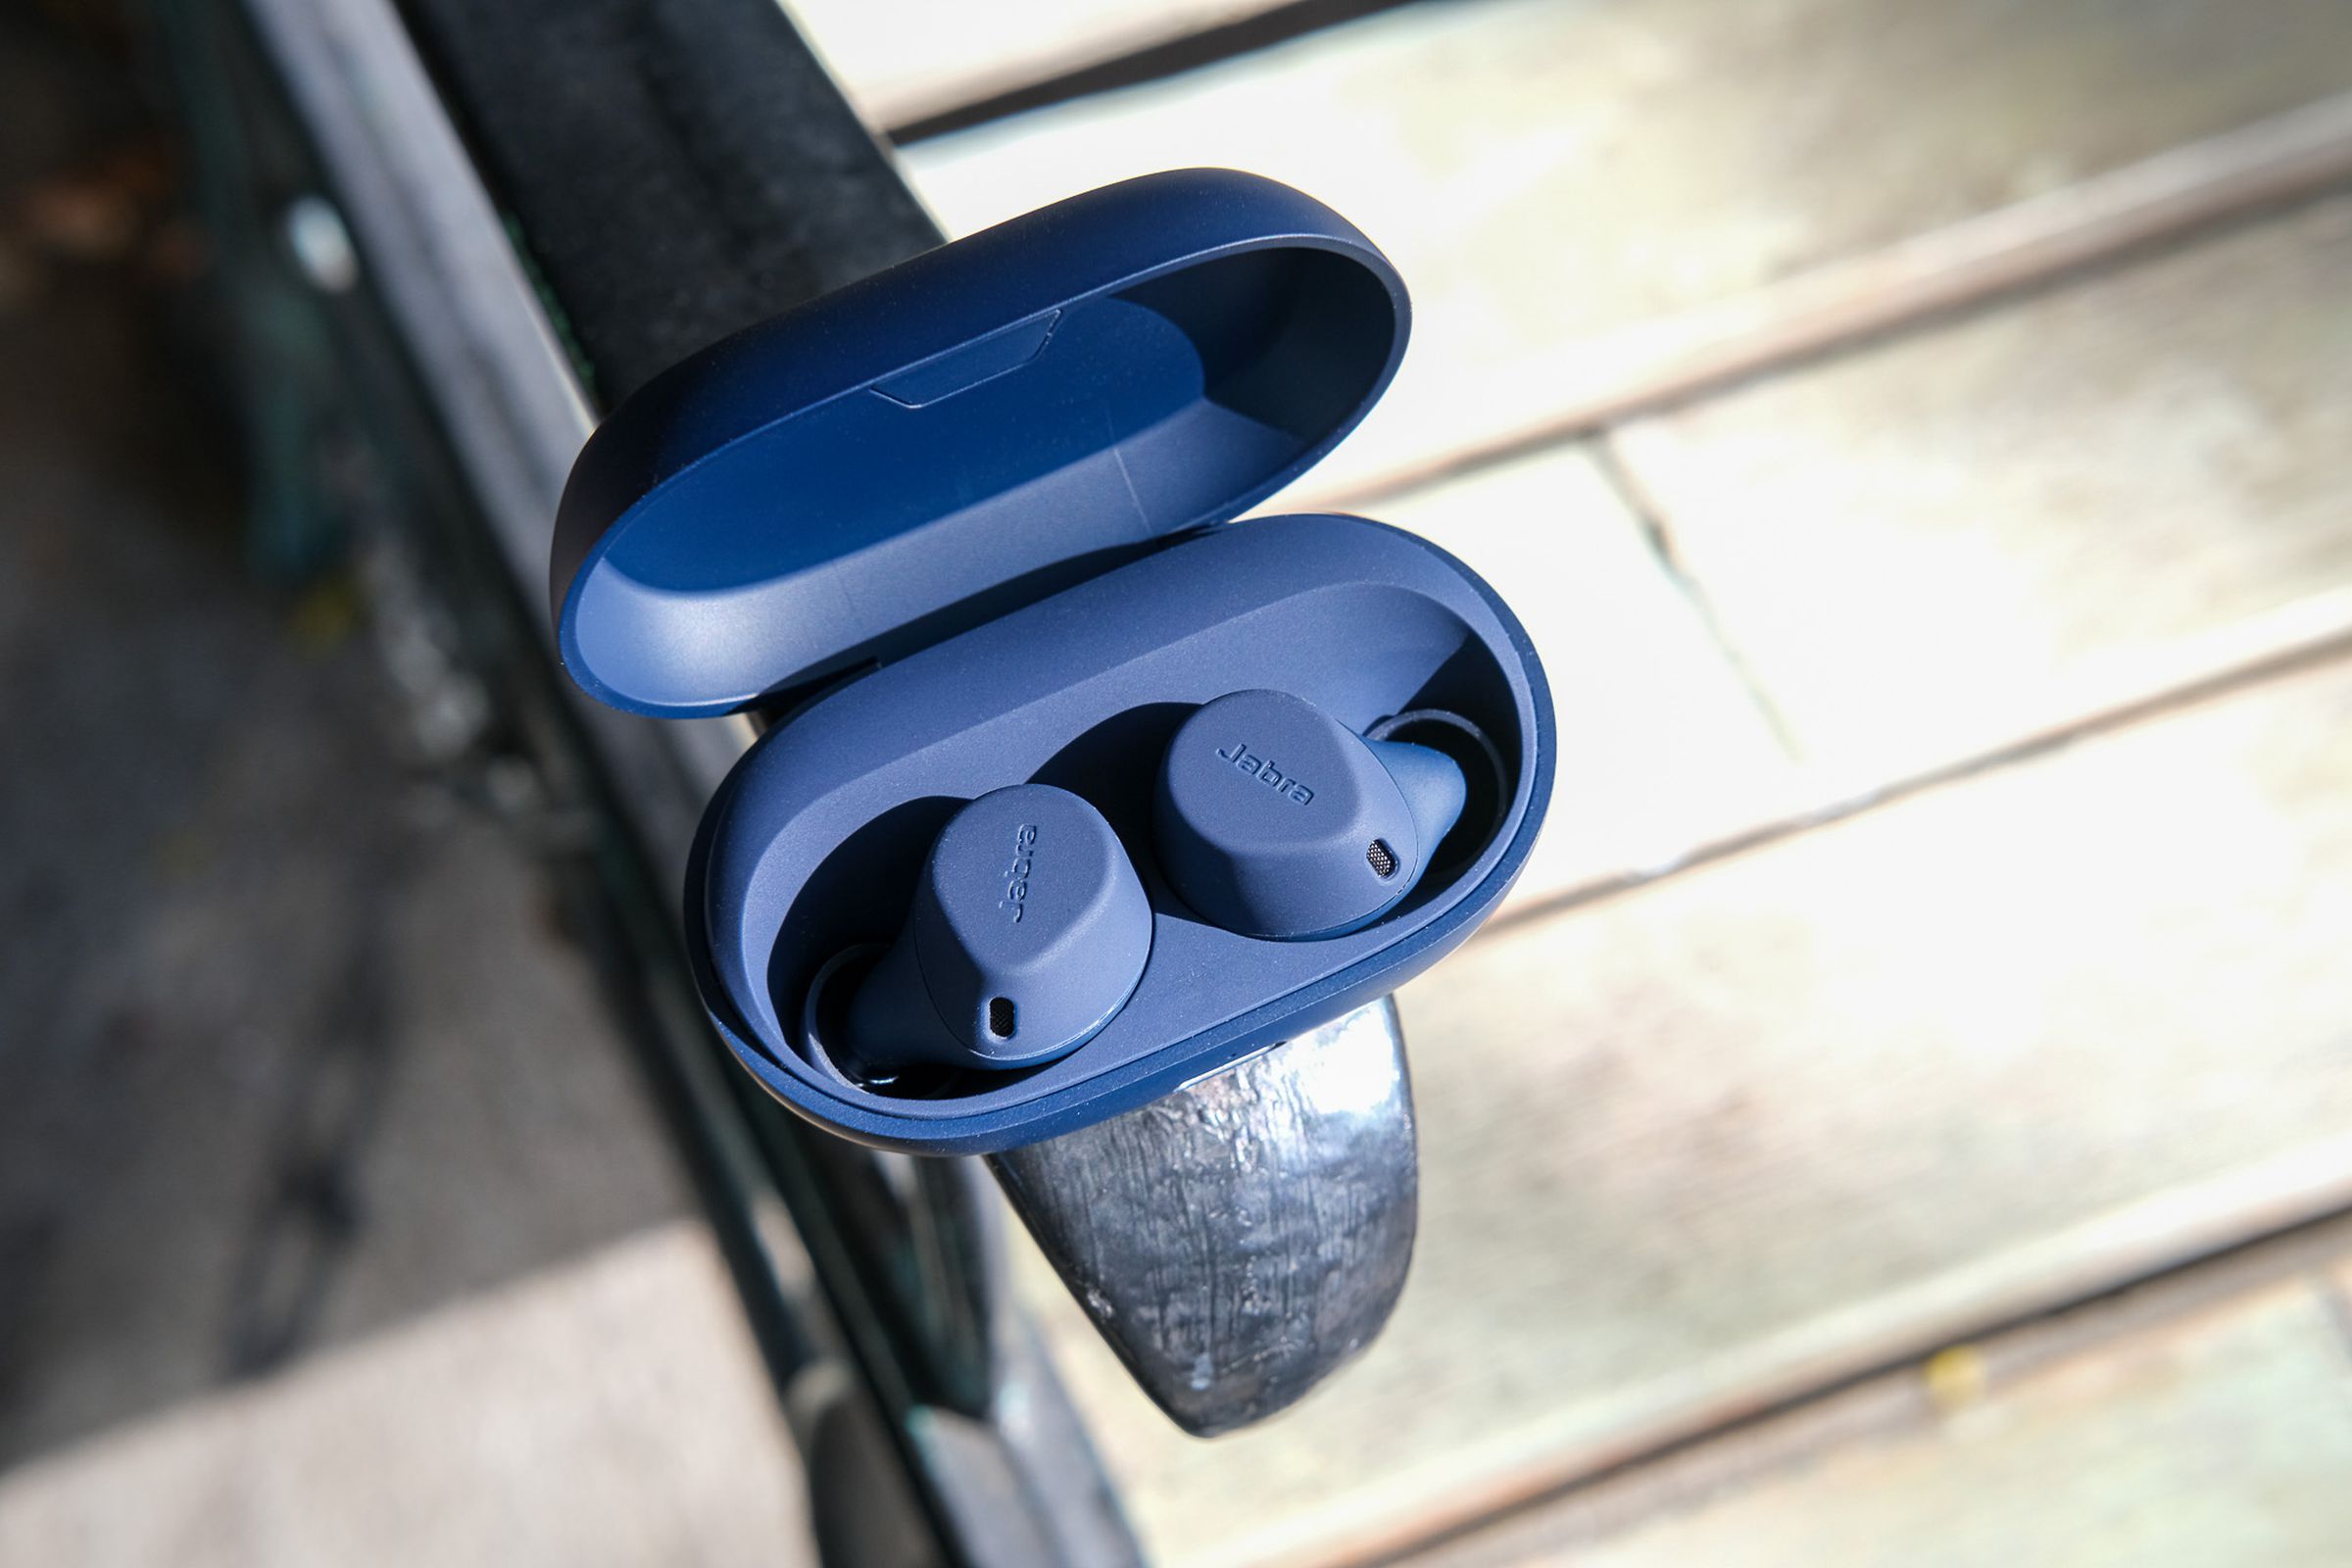 An image of Jabra’s Elite 7 Active earbuds photographed on a bench.